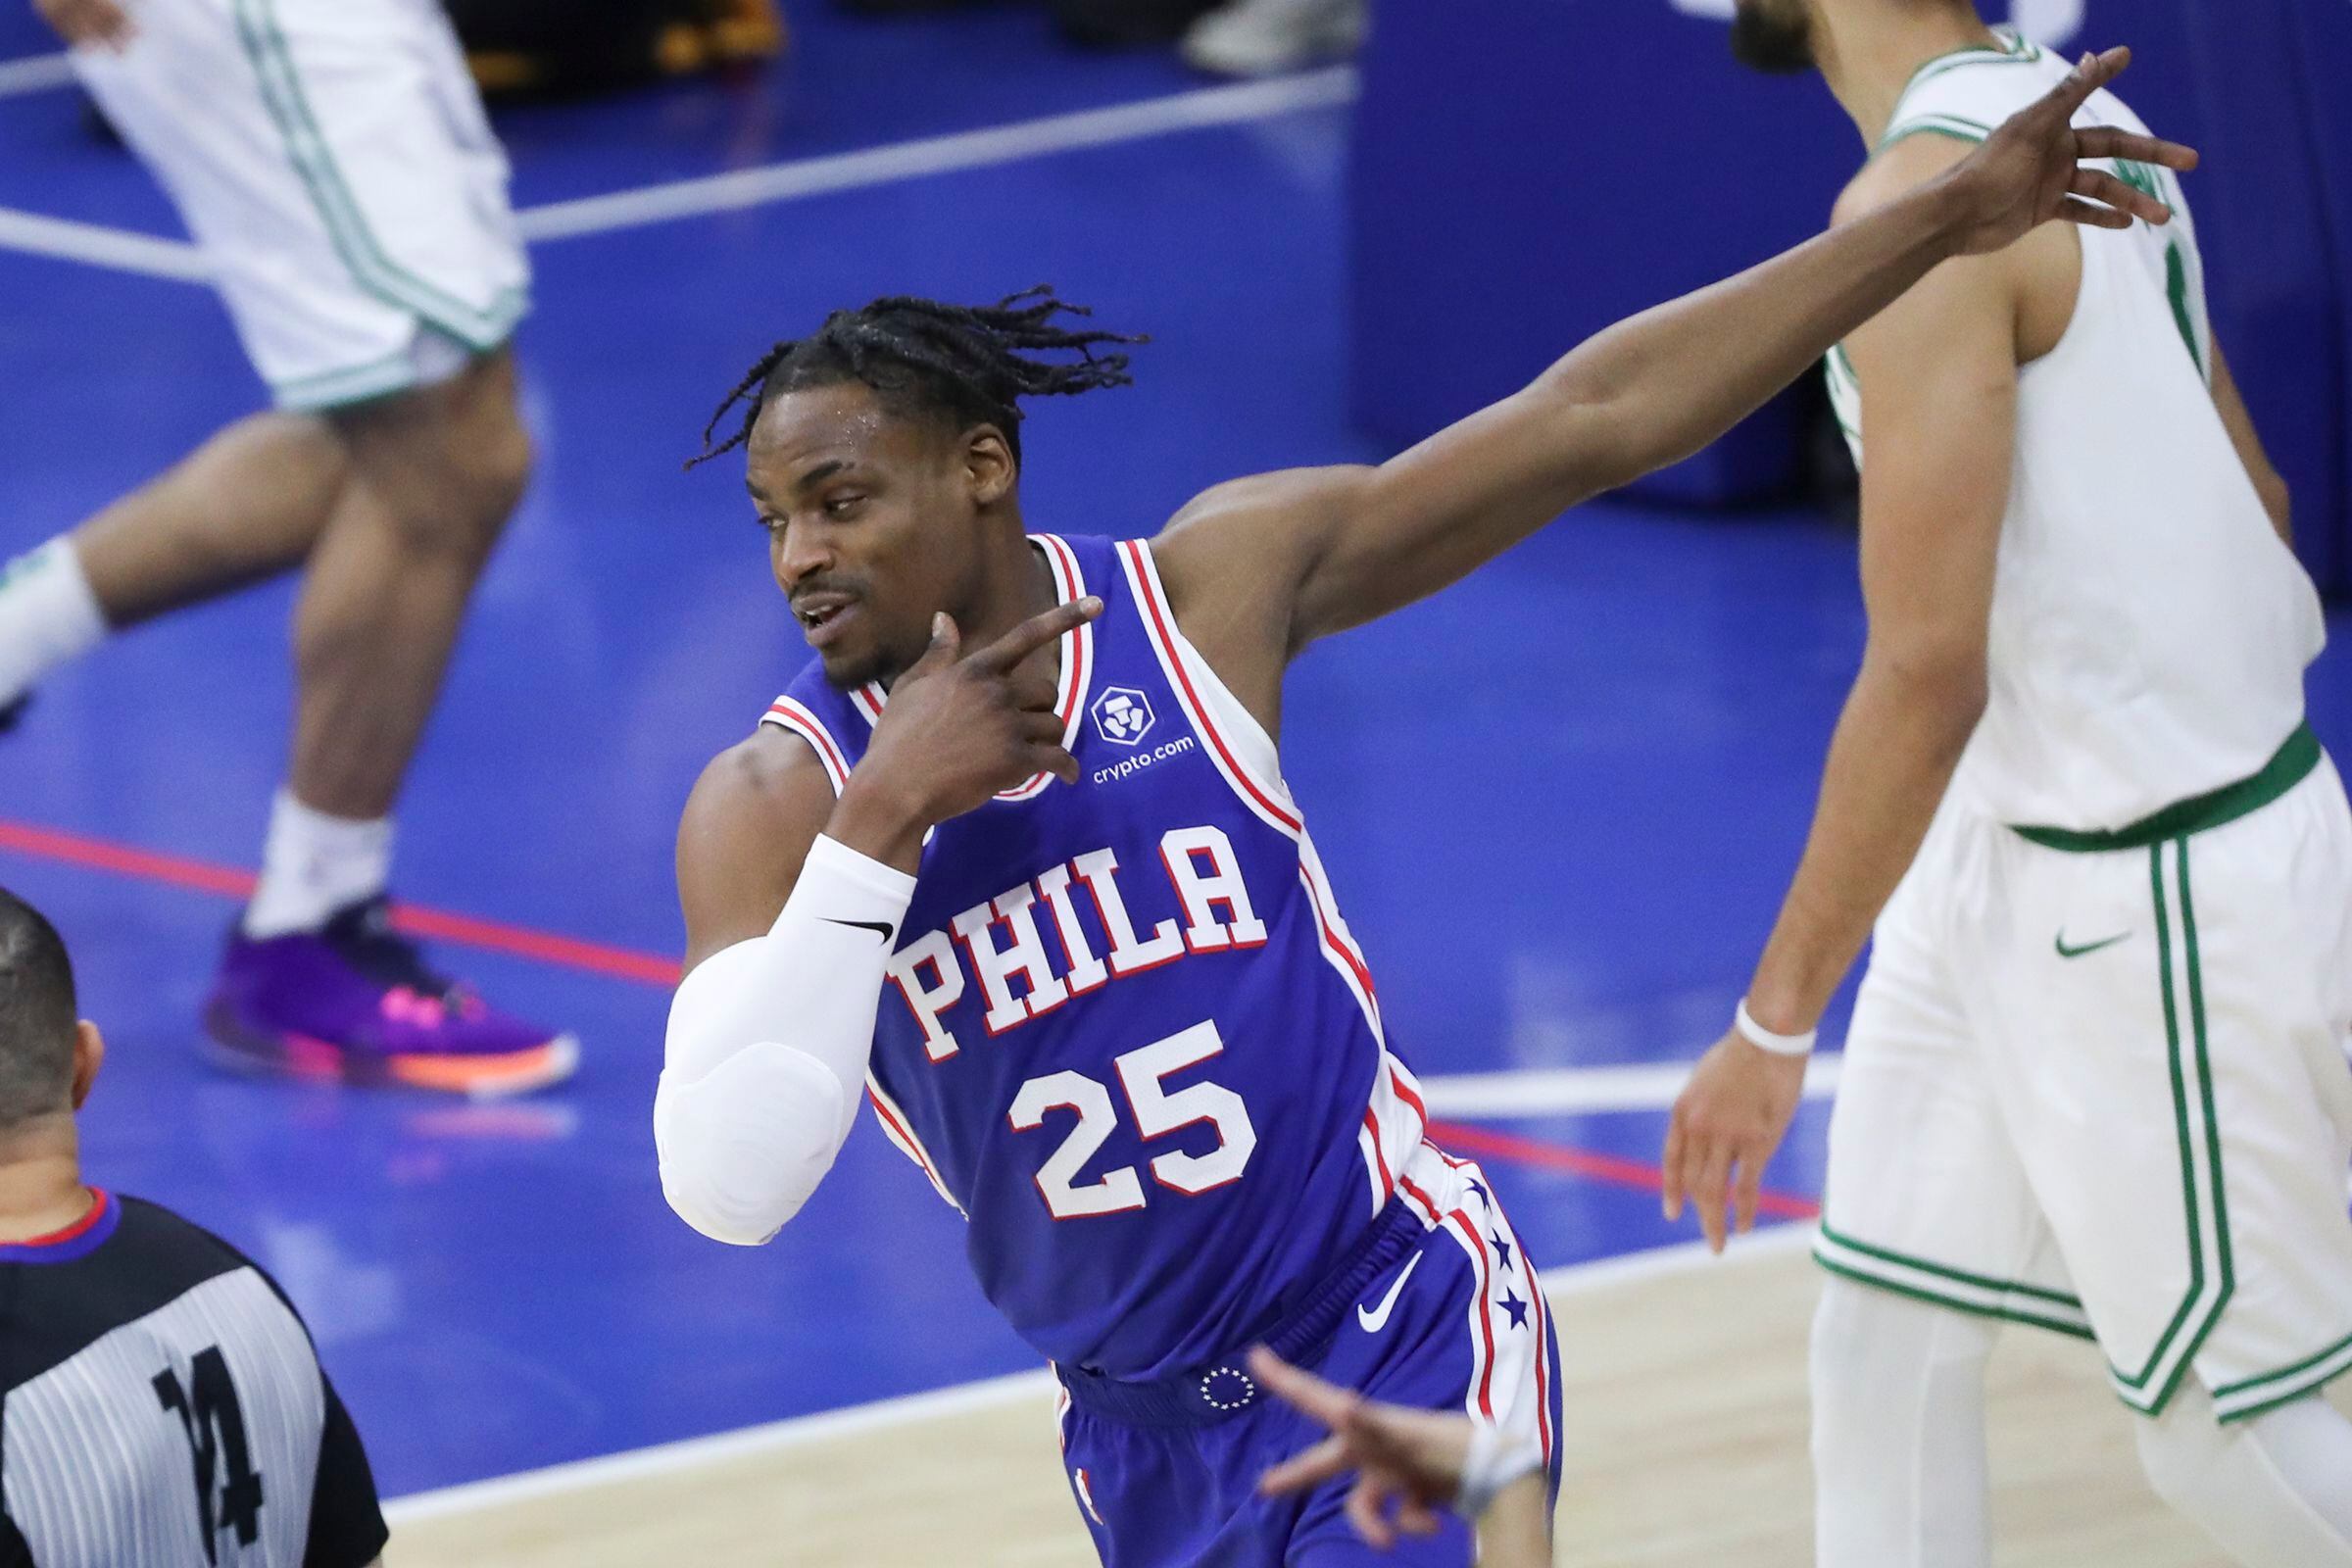 Who thought it was a good idea for the Lakers to wear blue in Philly away?  : r/nba